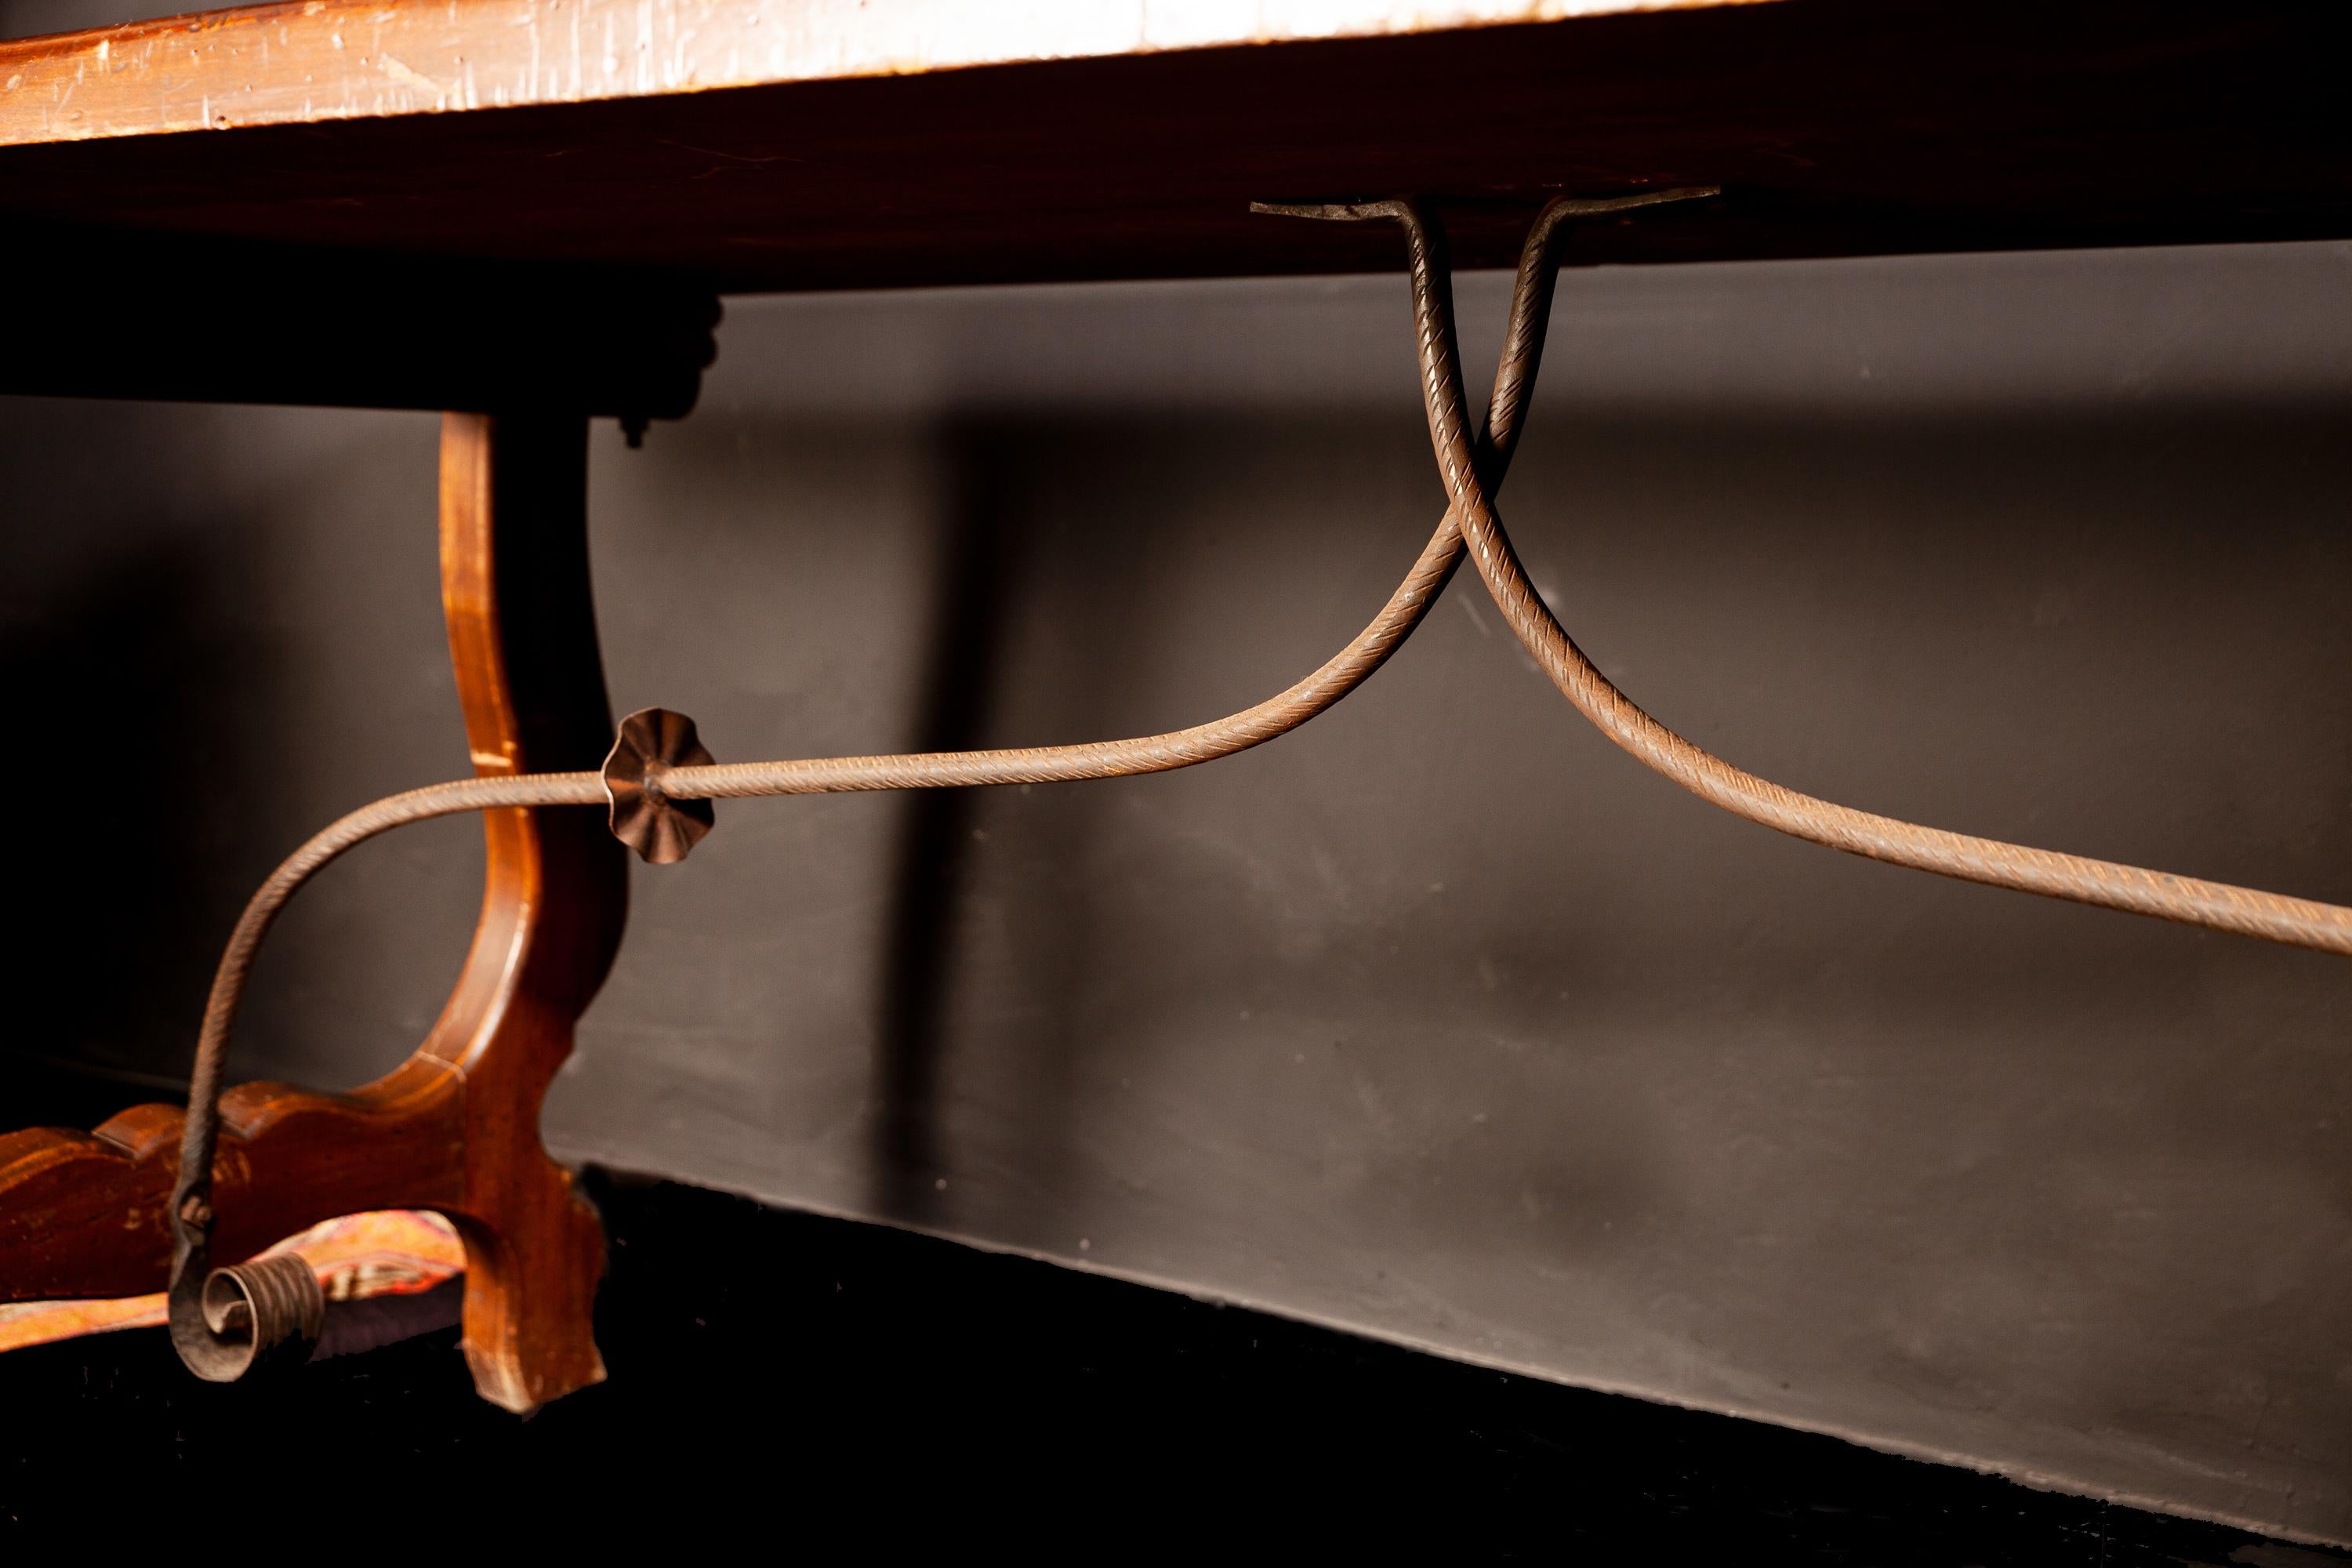 A Tuscany walnut table with rectangular top and sophisticated lyre legs, joined by wrought iron stretcher.